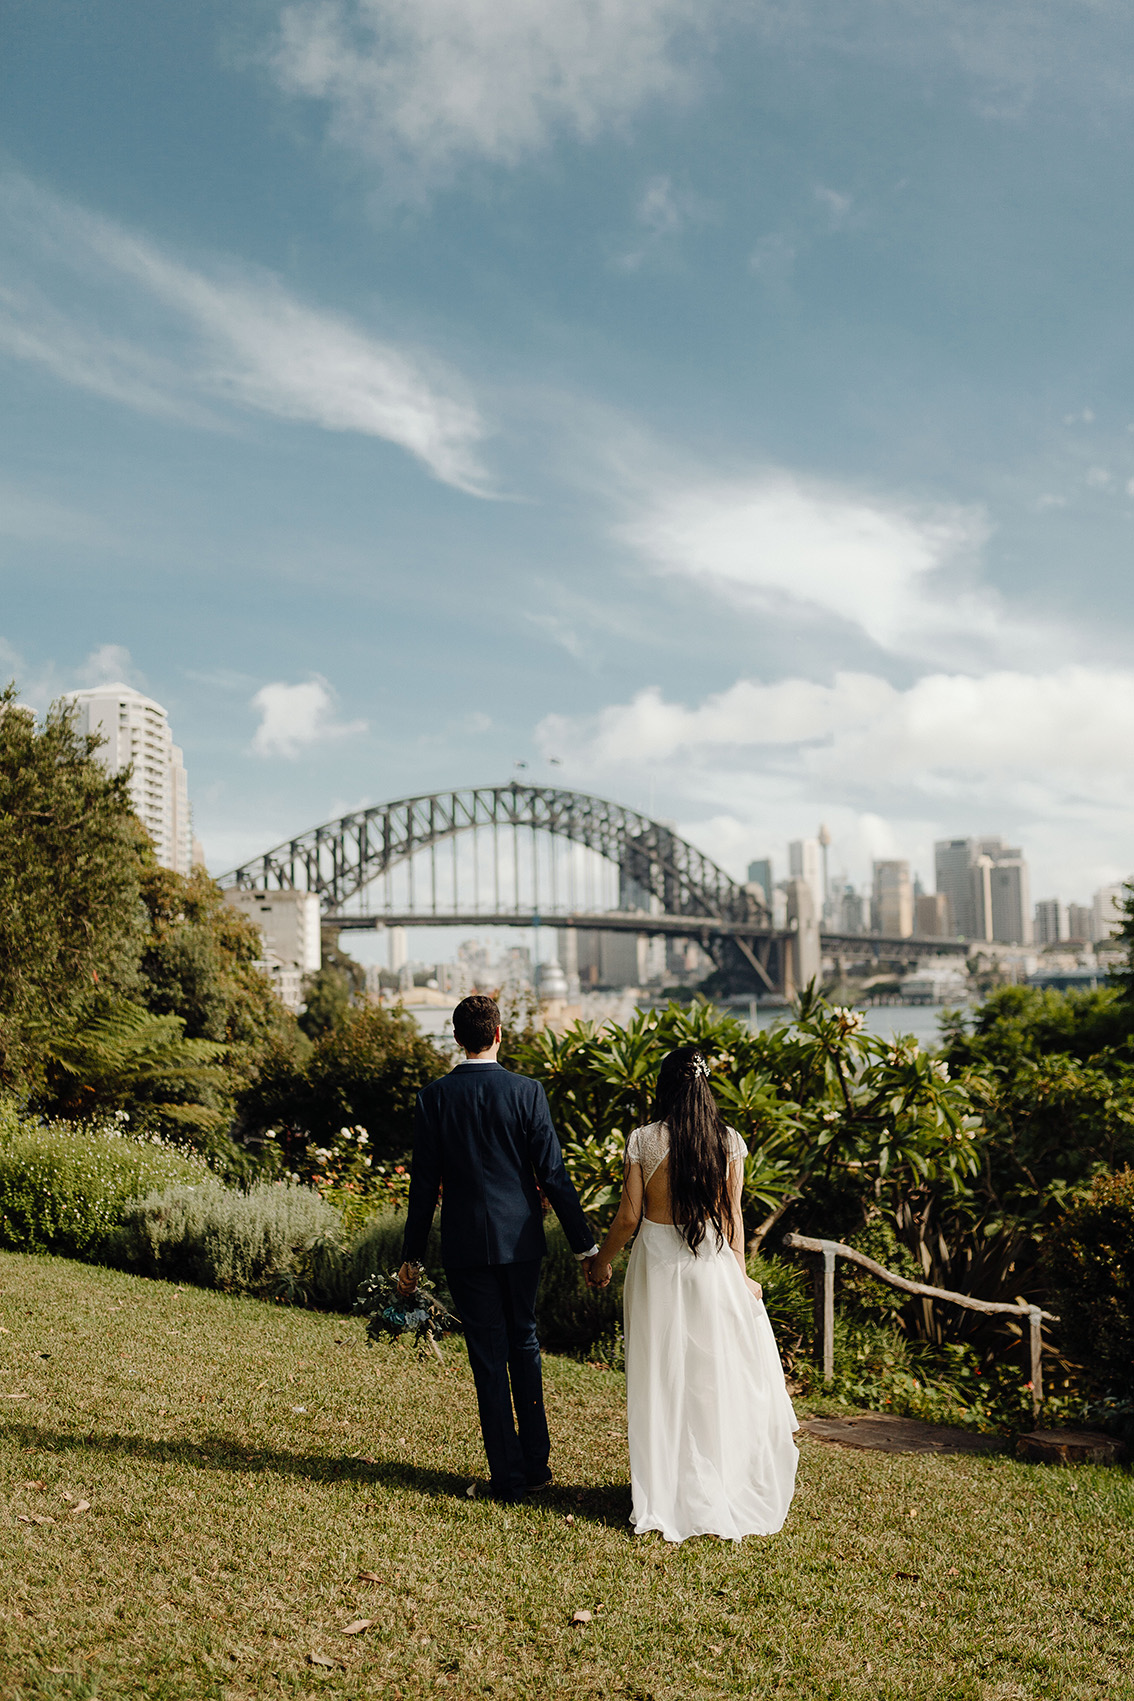 Wedding ceremony locations with a view